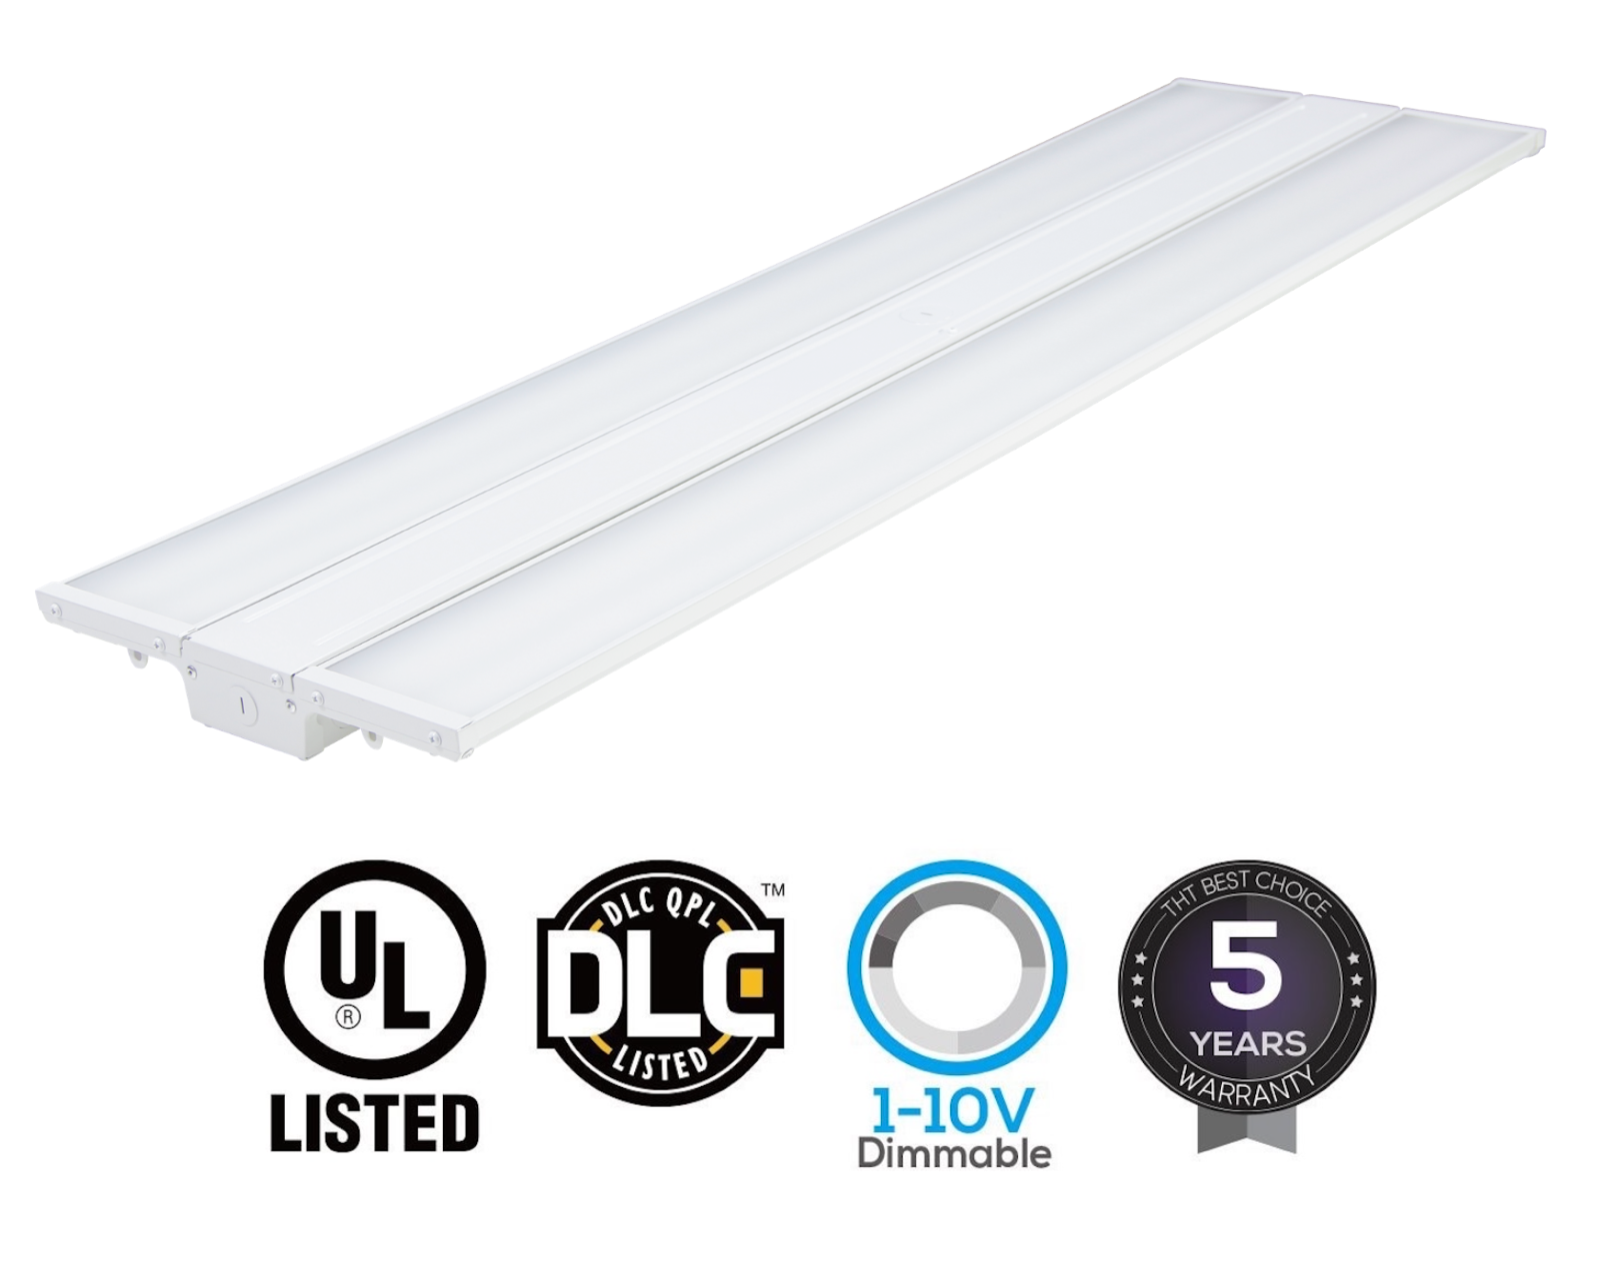 Led Linear High Bay Warehouse Light White Fixture Factory 250w-1500w Equivalent